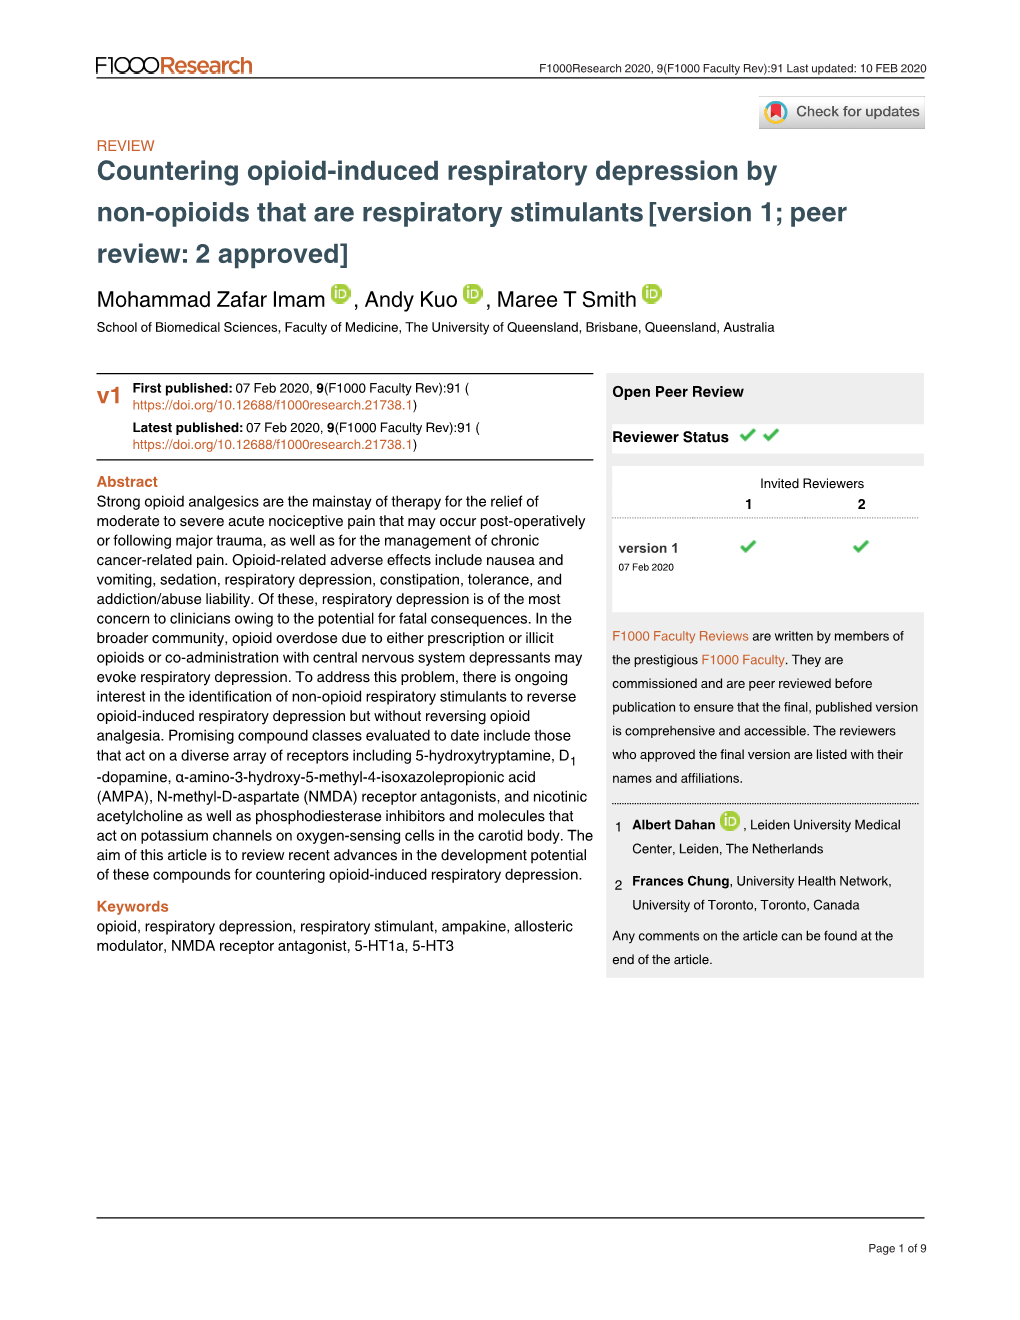 Countering Opioid-Induced Respiratory Depression by Non-Opioids That Are